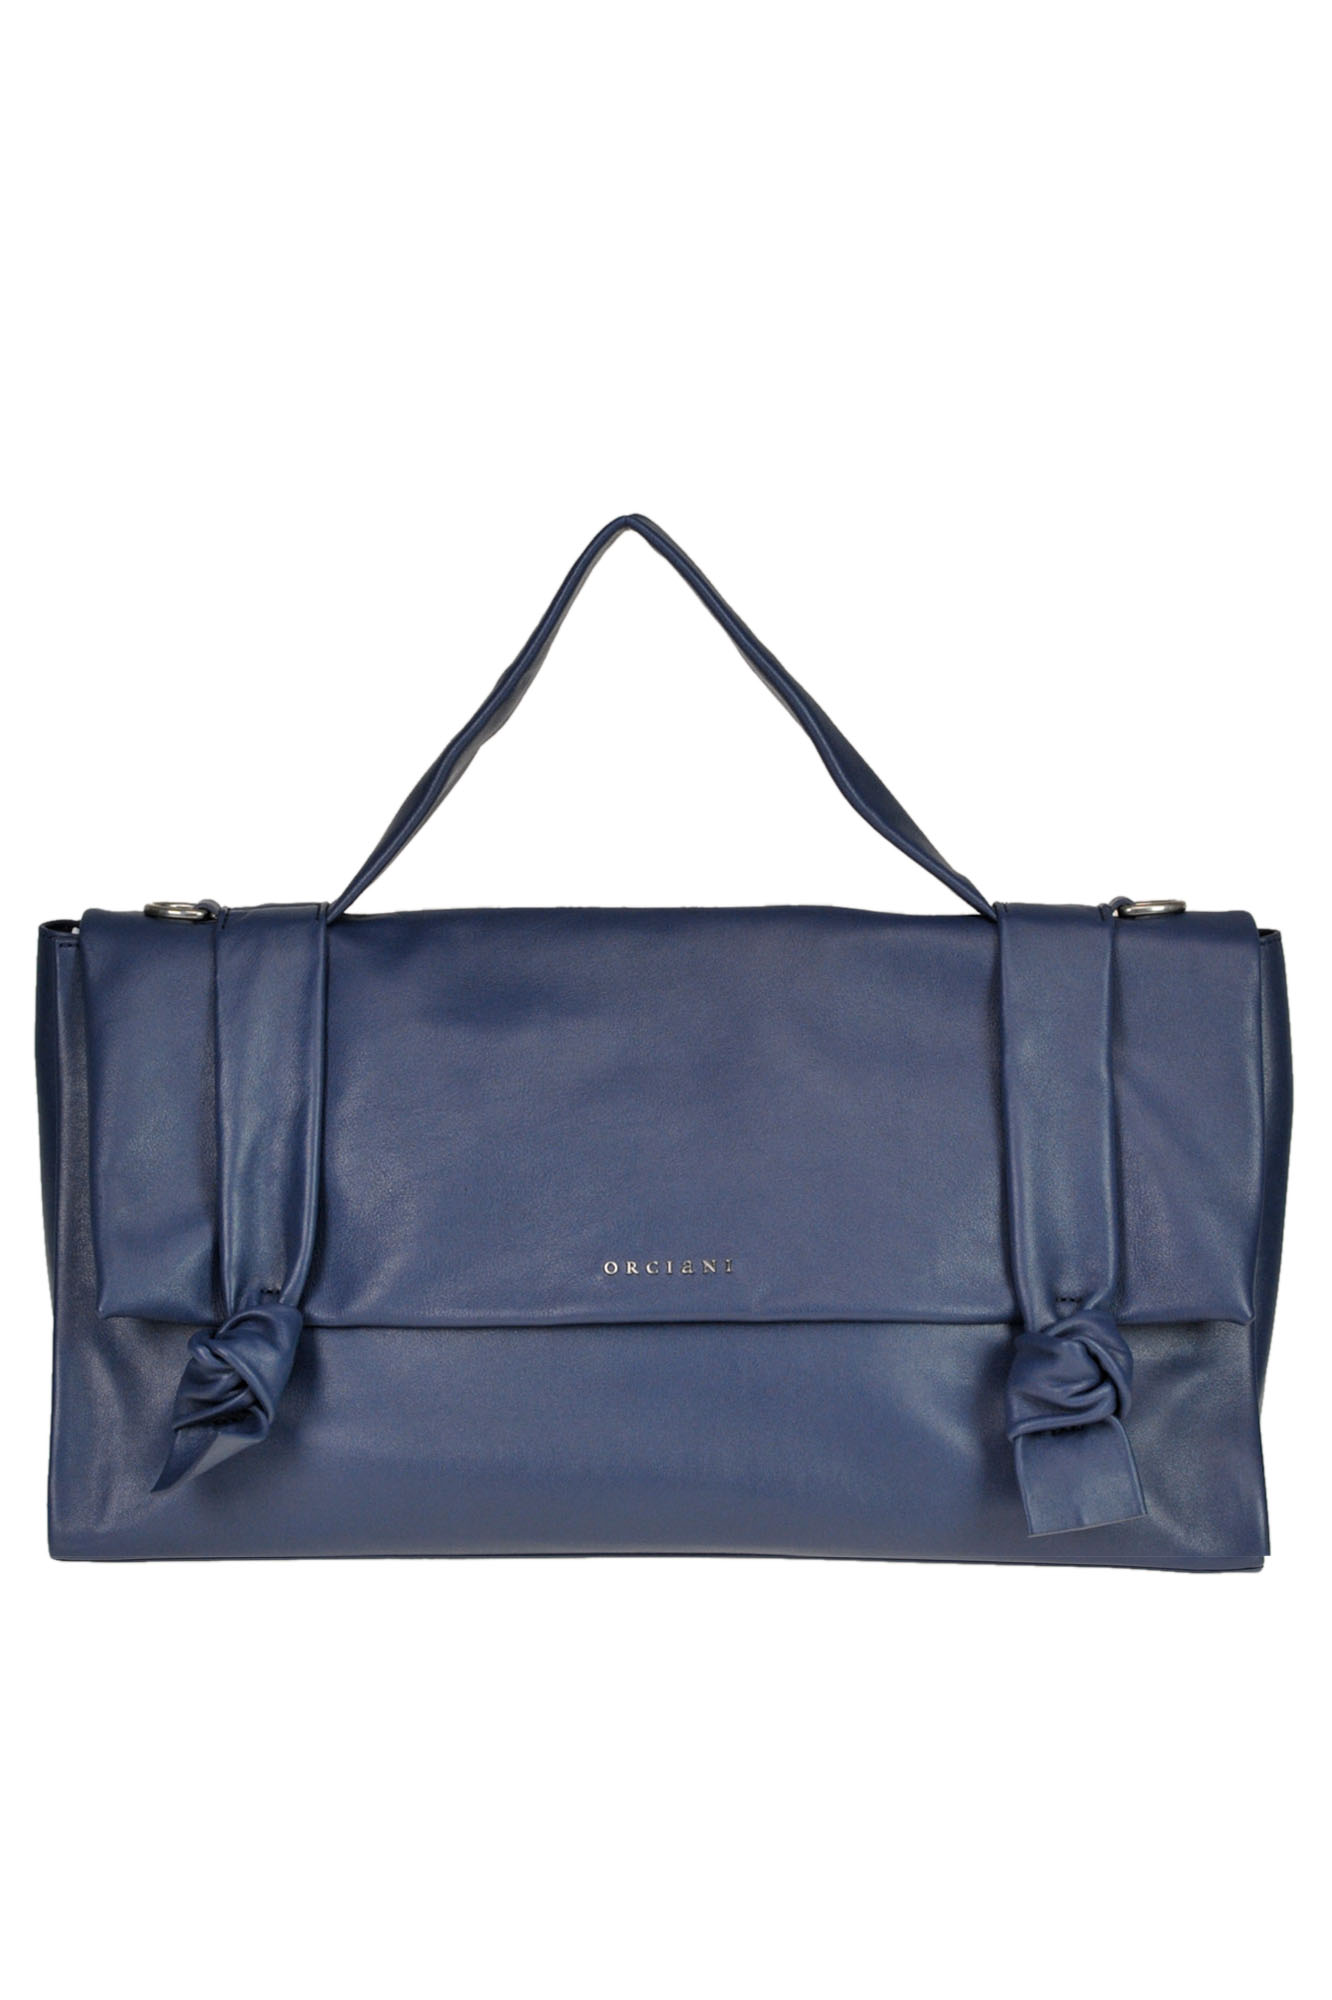 Orciani 'bella' Leather Bag In Navy Blue